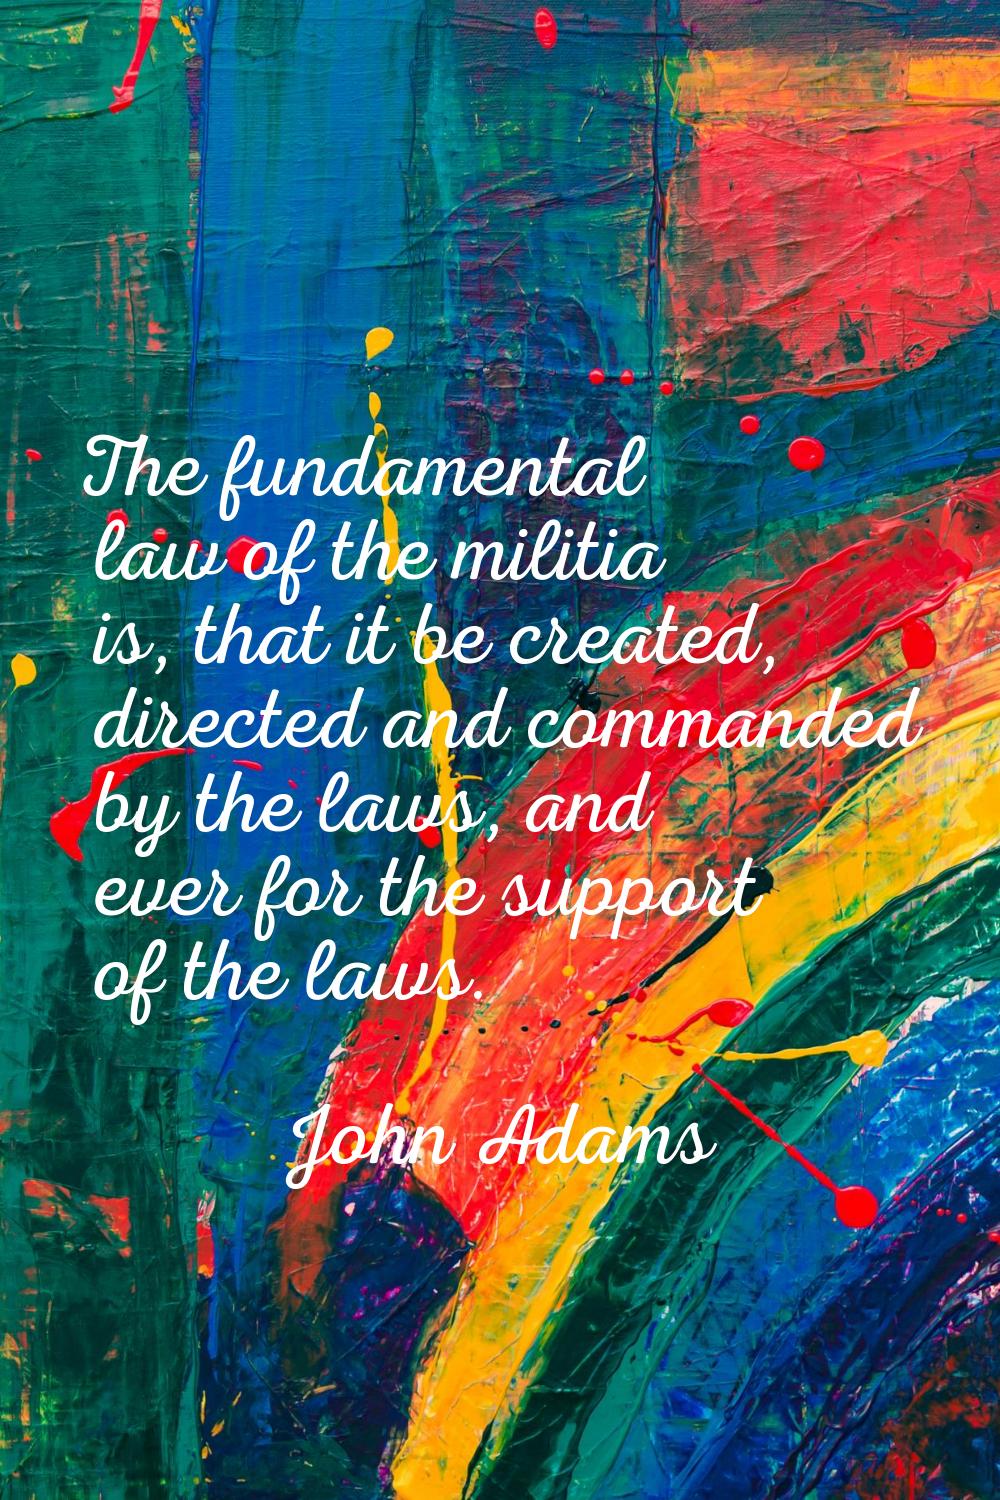 The fundamental law of the militia is, that it be created, directed and commanded by the laws, and 